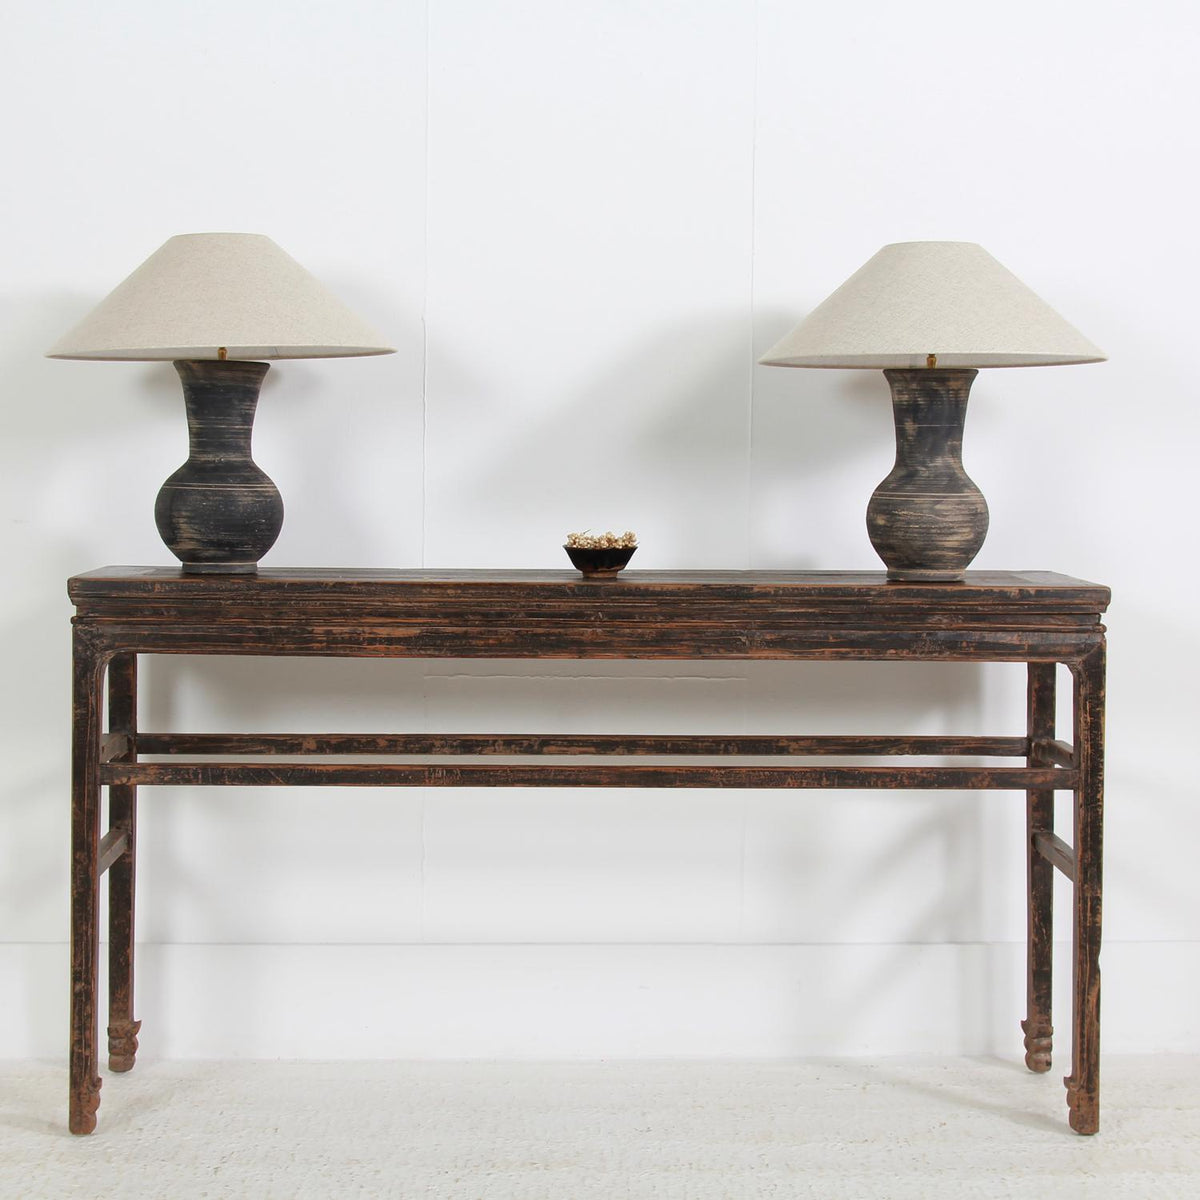 NEAR PAIR OF CHINESE HAN STYLE LAMPS WITH HANDMADE BELGIAN NATURAL LINEN SHADES